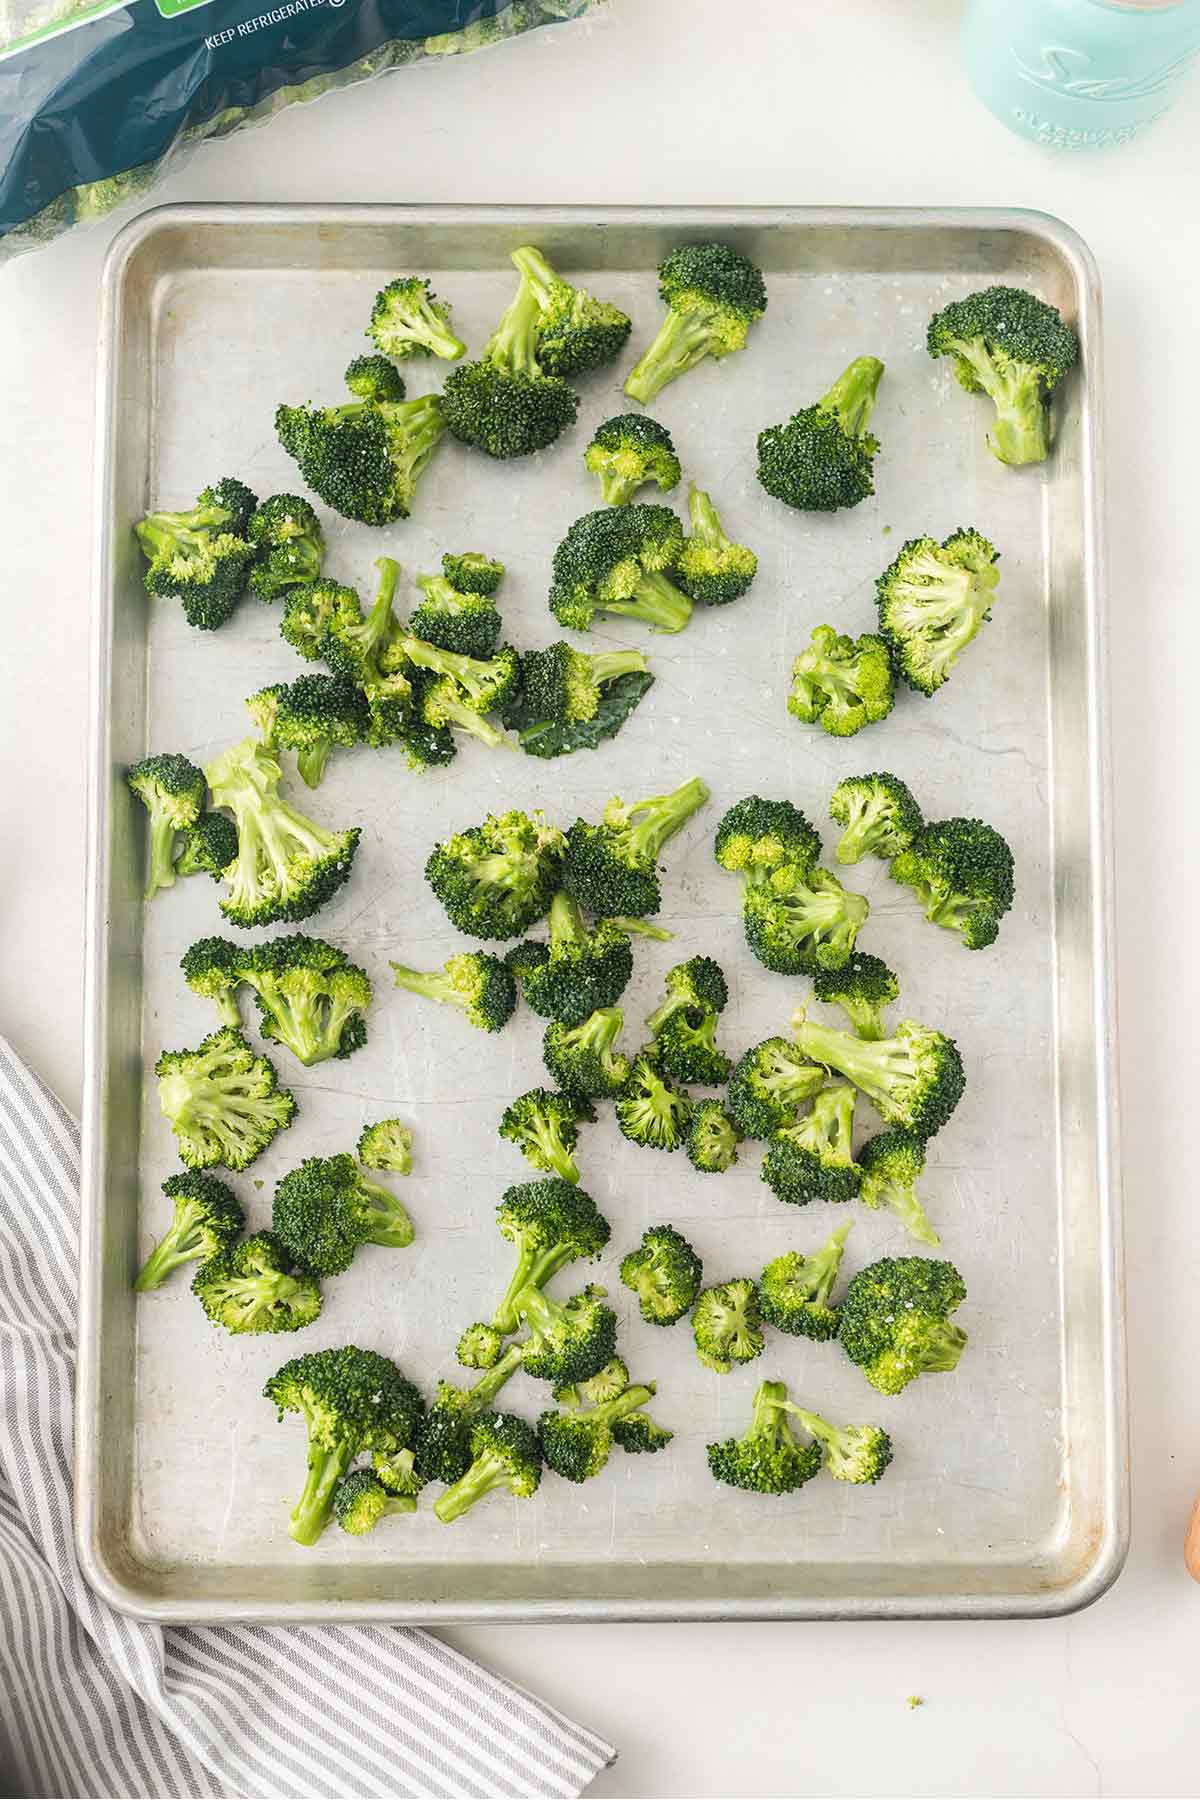 Overhead shot of broccoli florets on baking sheet ready to go into the oven for roasting.